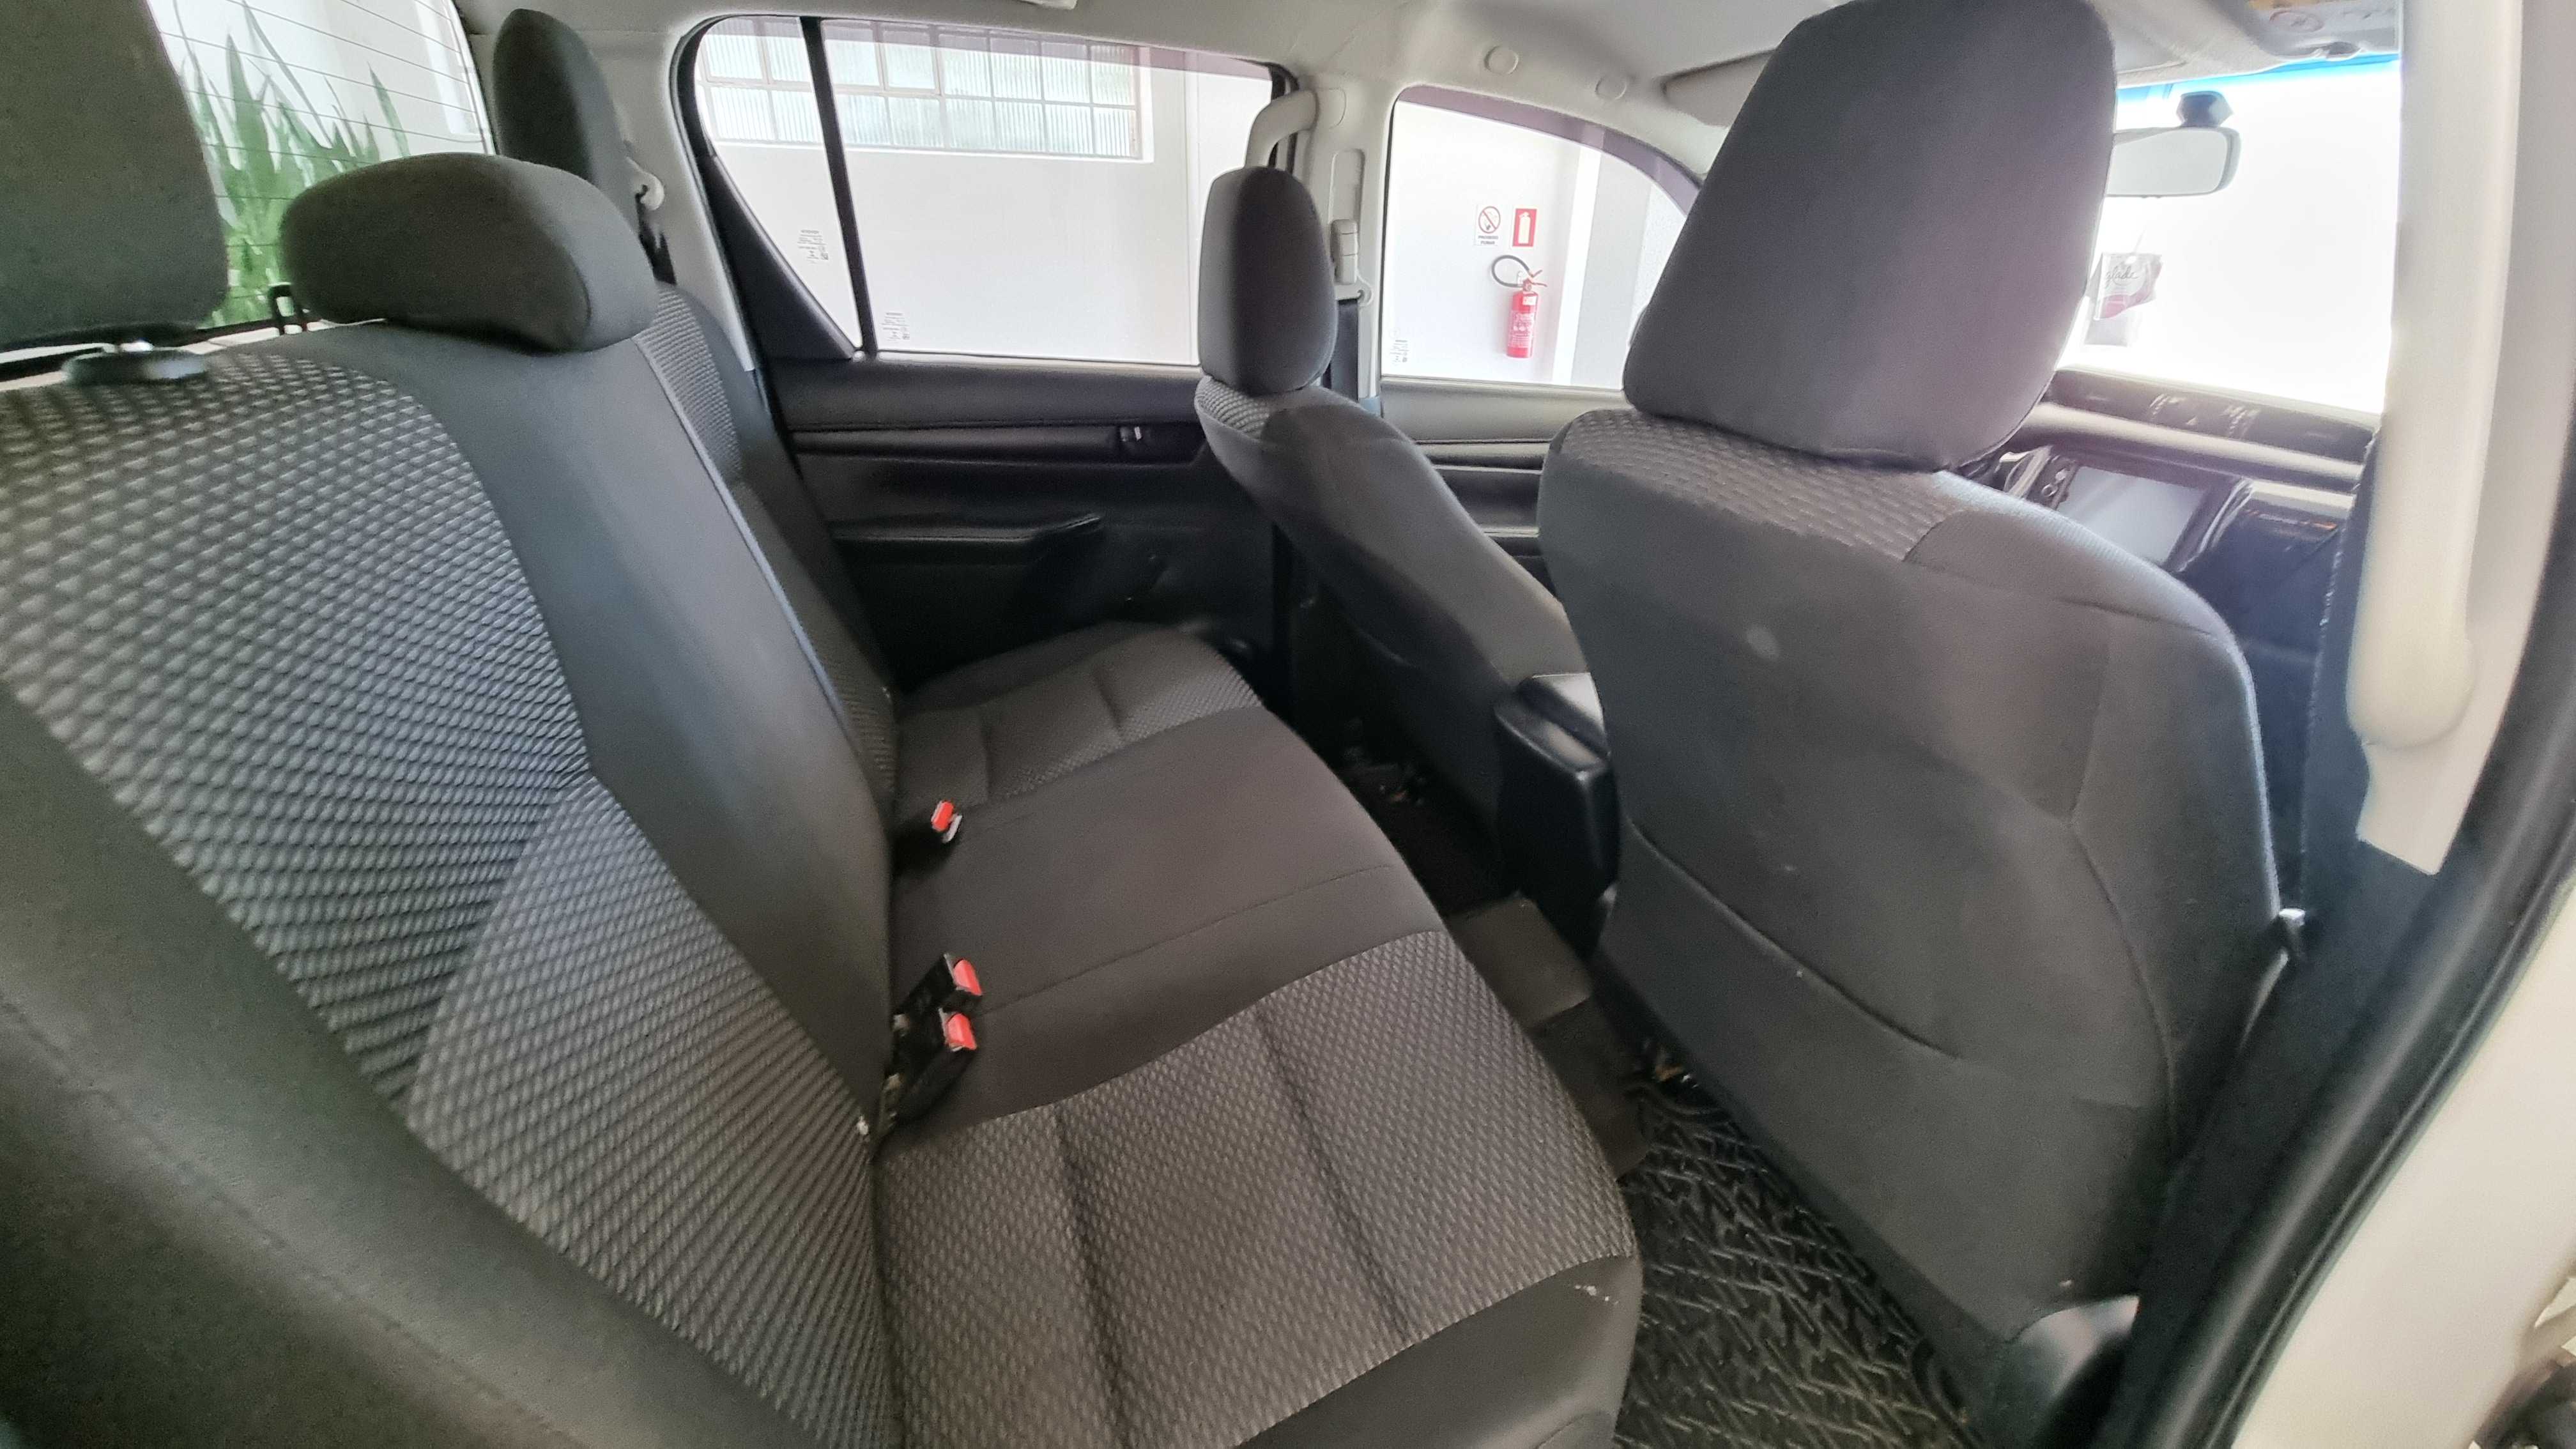 HILUX CD 4X4 CAMBIO MANUAL